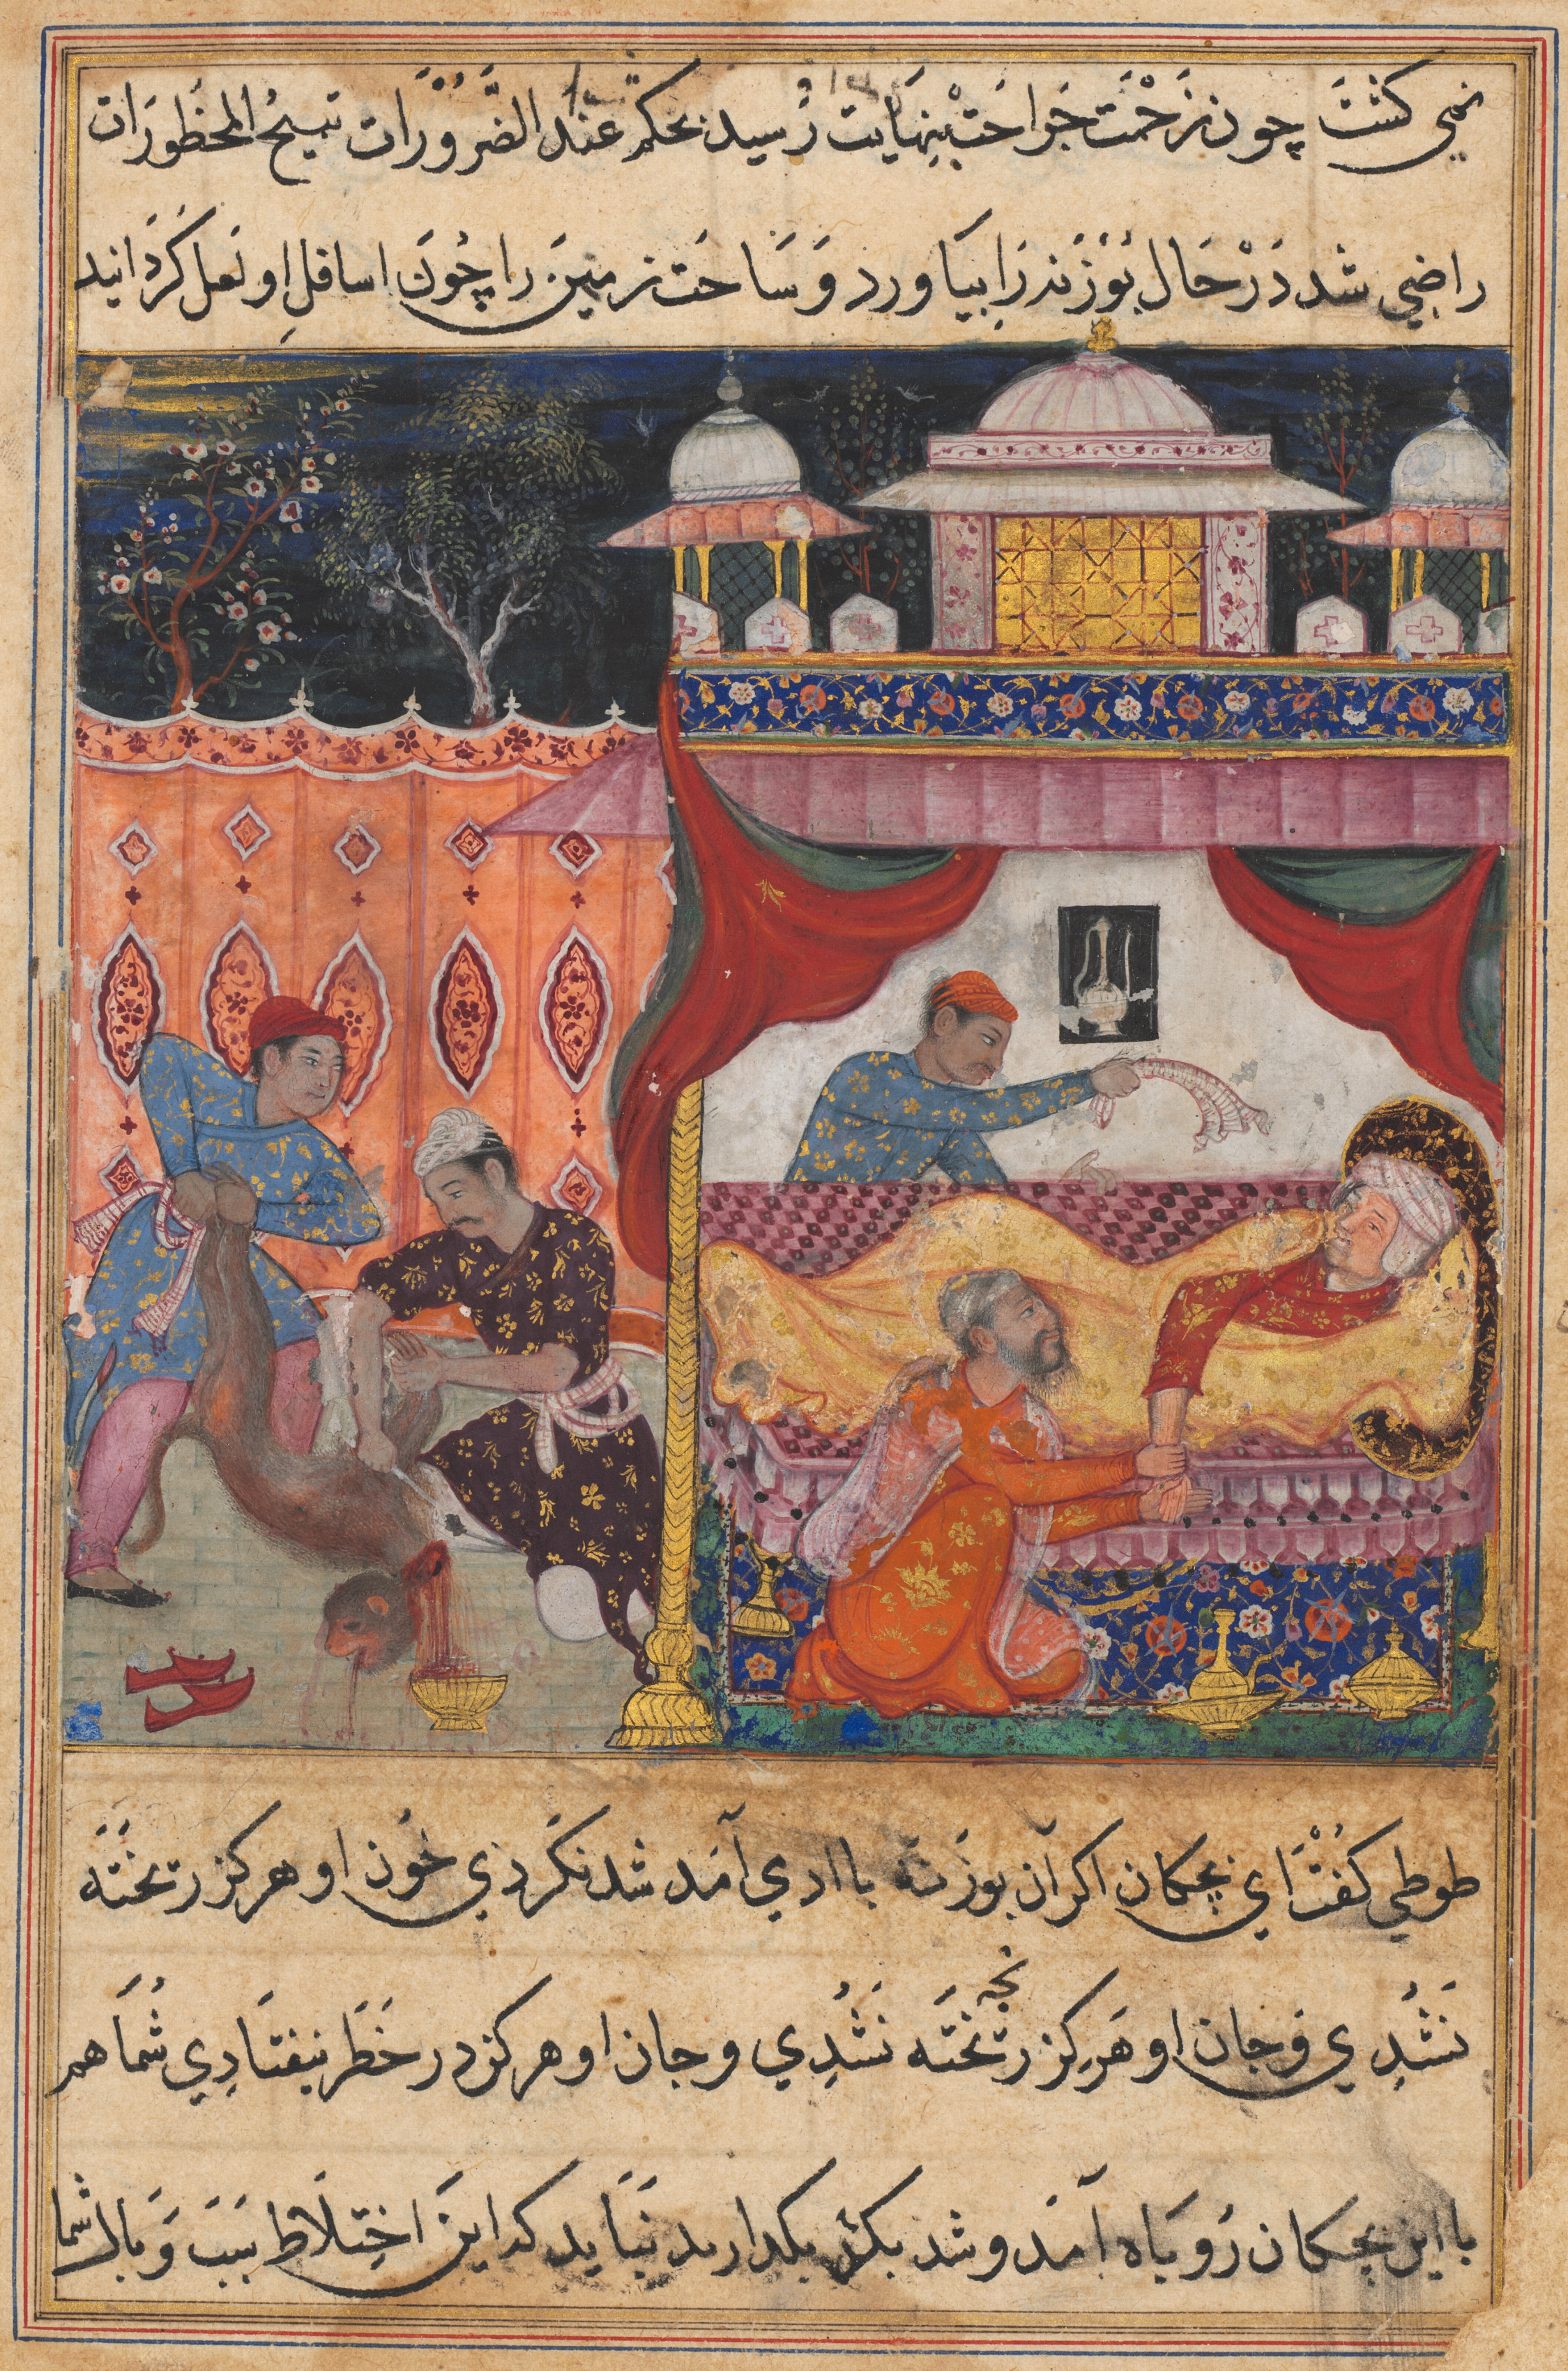 The monkey slain, his blood to be used as medicine for the ailing prince he has bitten, from a Tuti-nama (Tales of a Parrot): Fifth Night